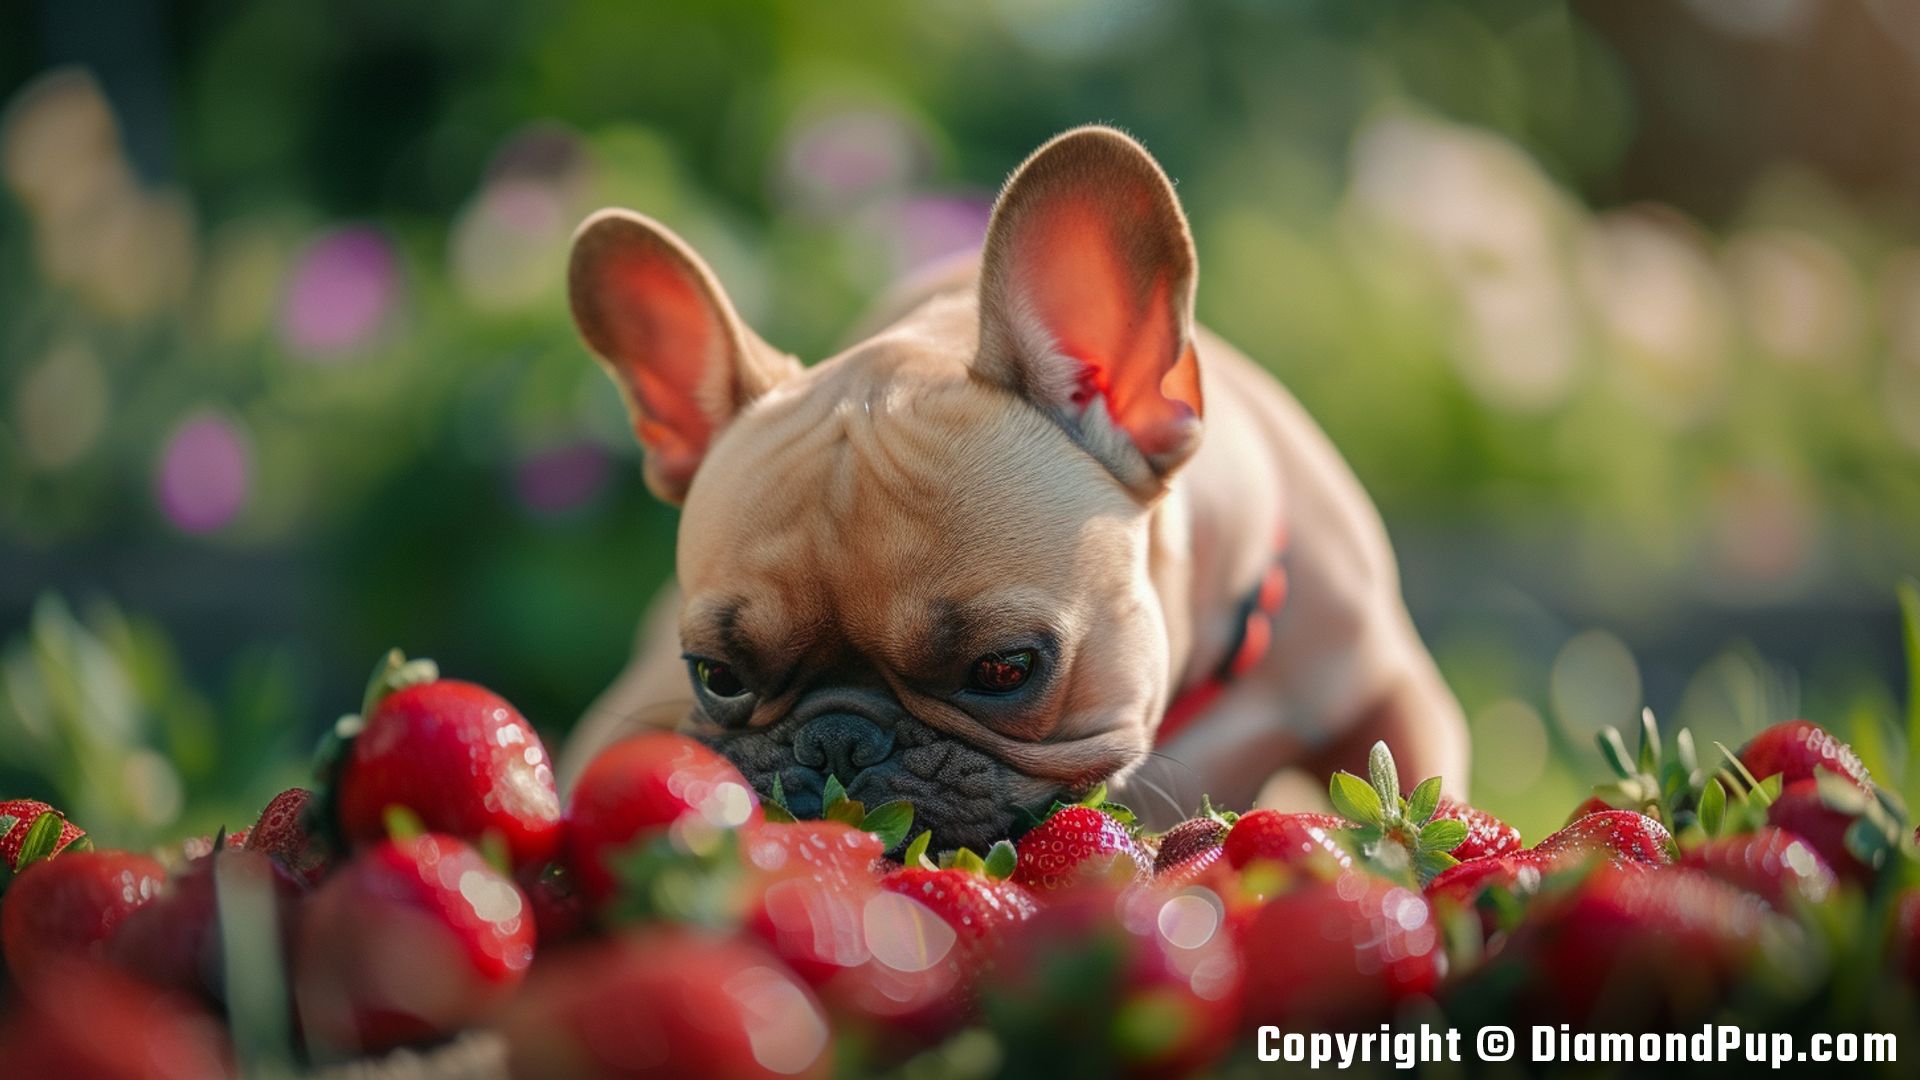 Photograph of a Cute French Bulldog Eating Strawberries